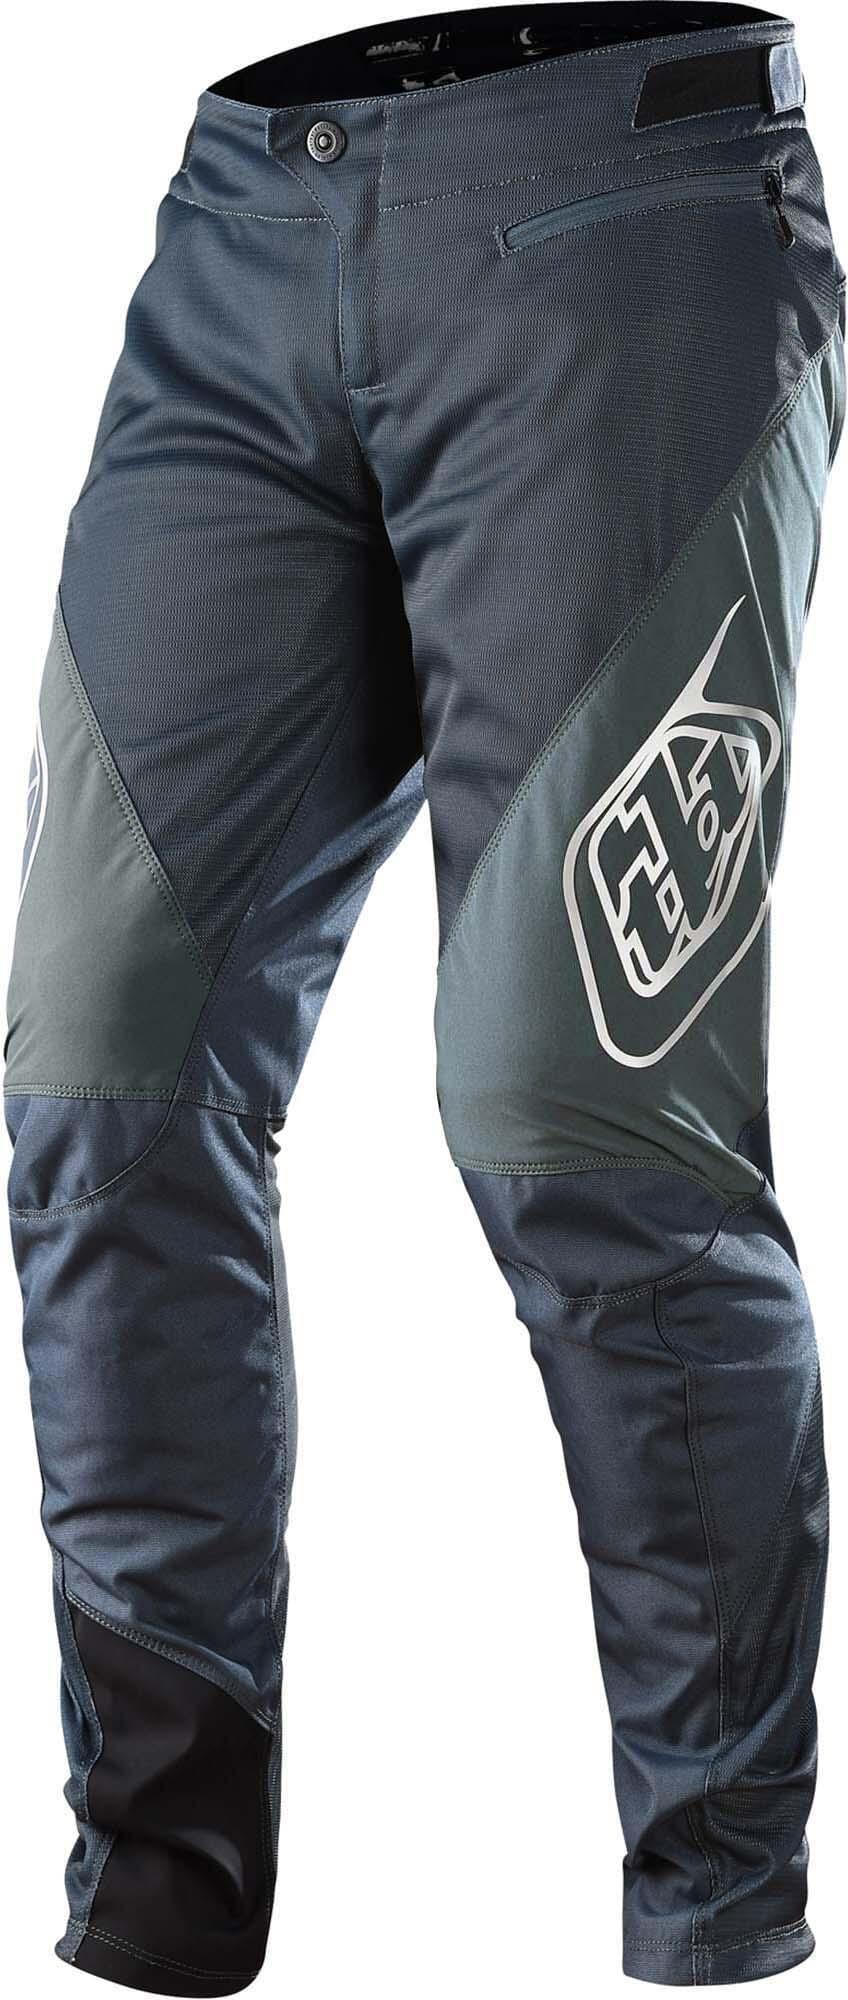 Troy Lee Designs Sprint Pant  Solid Charcoal